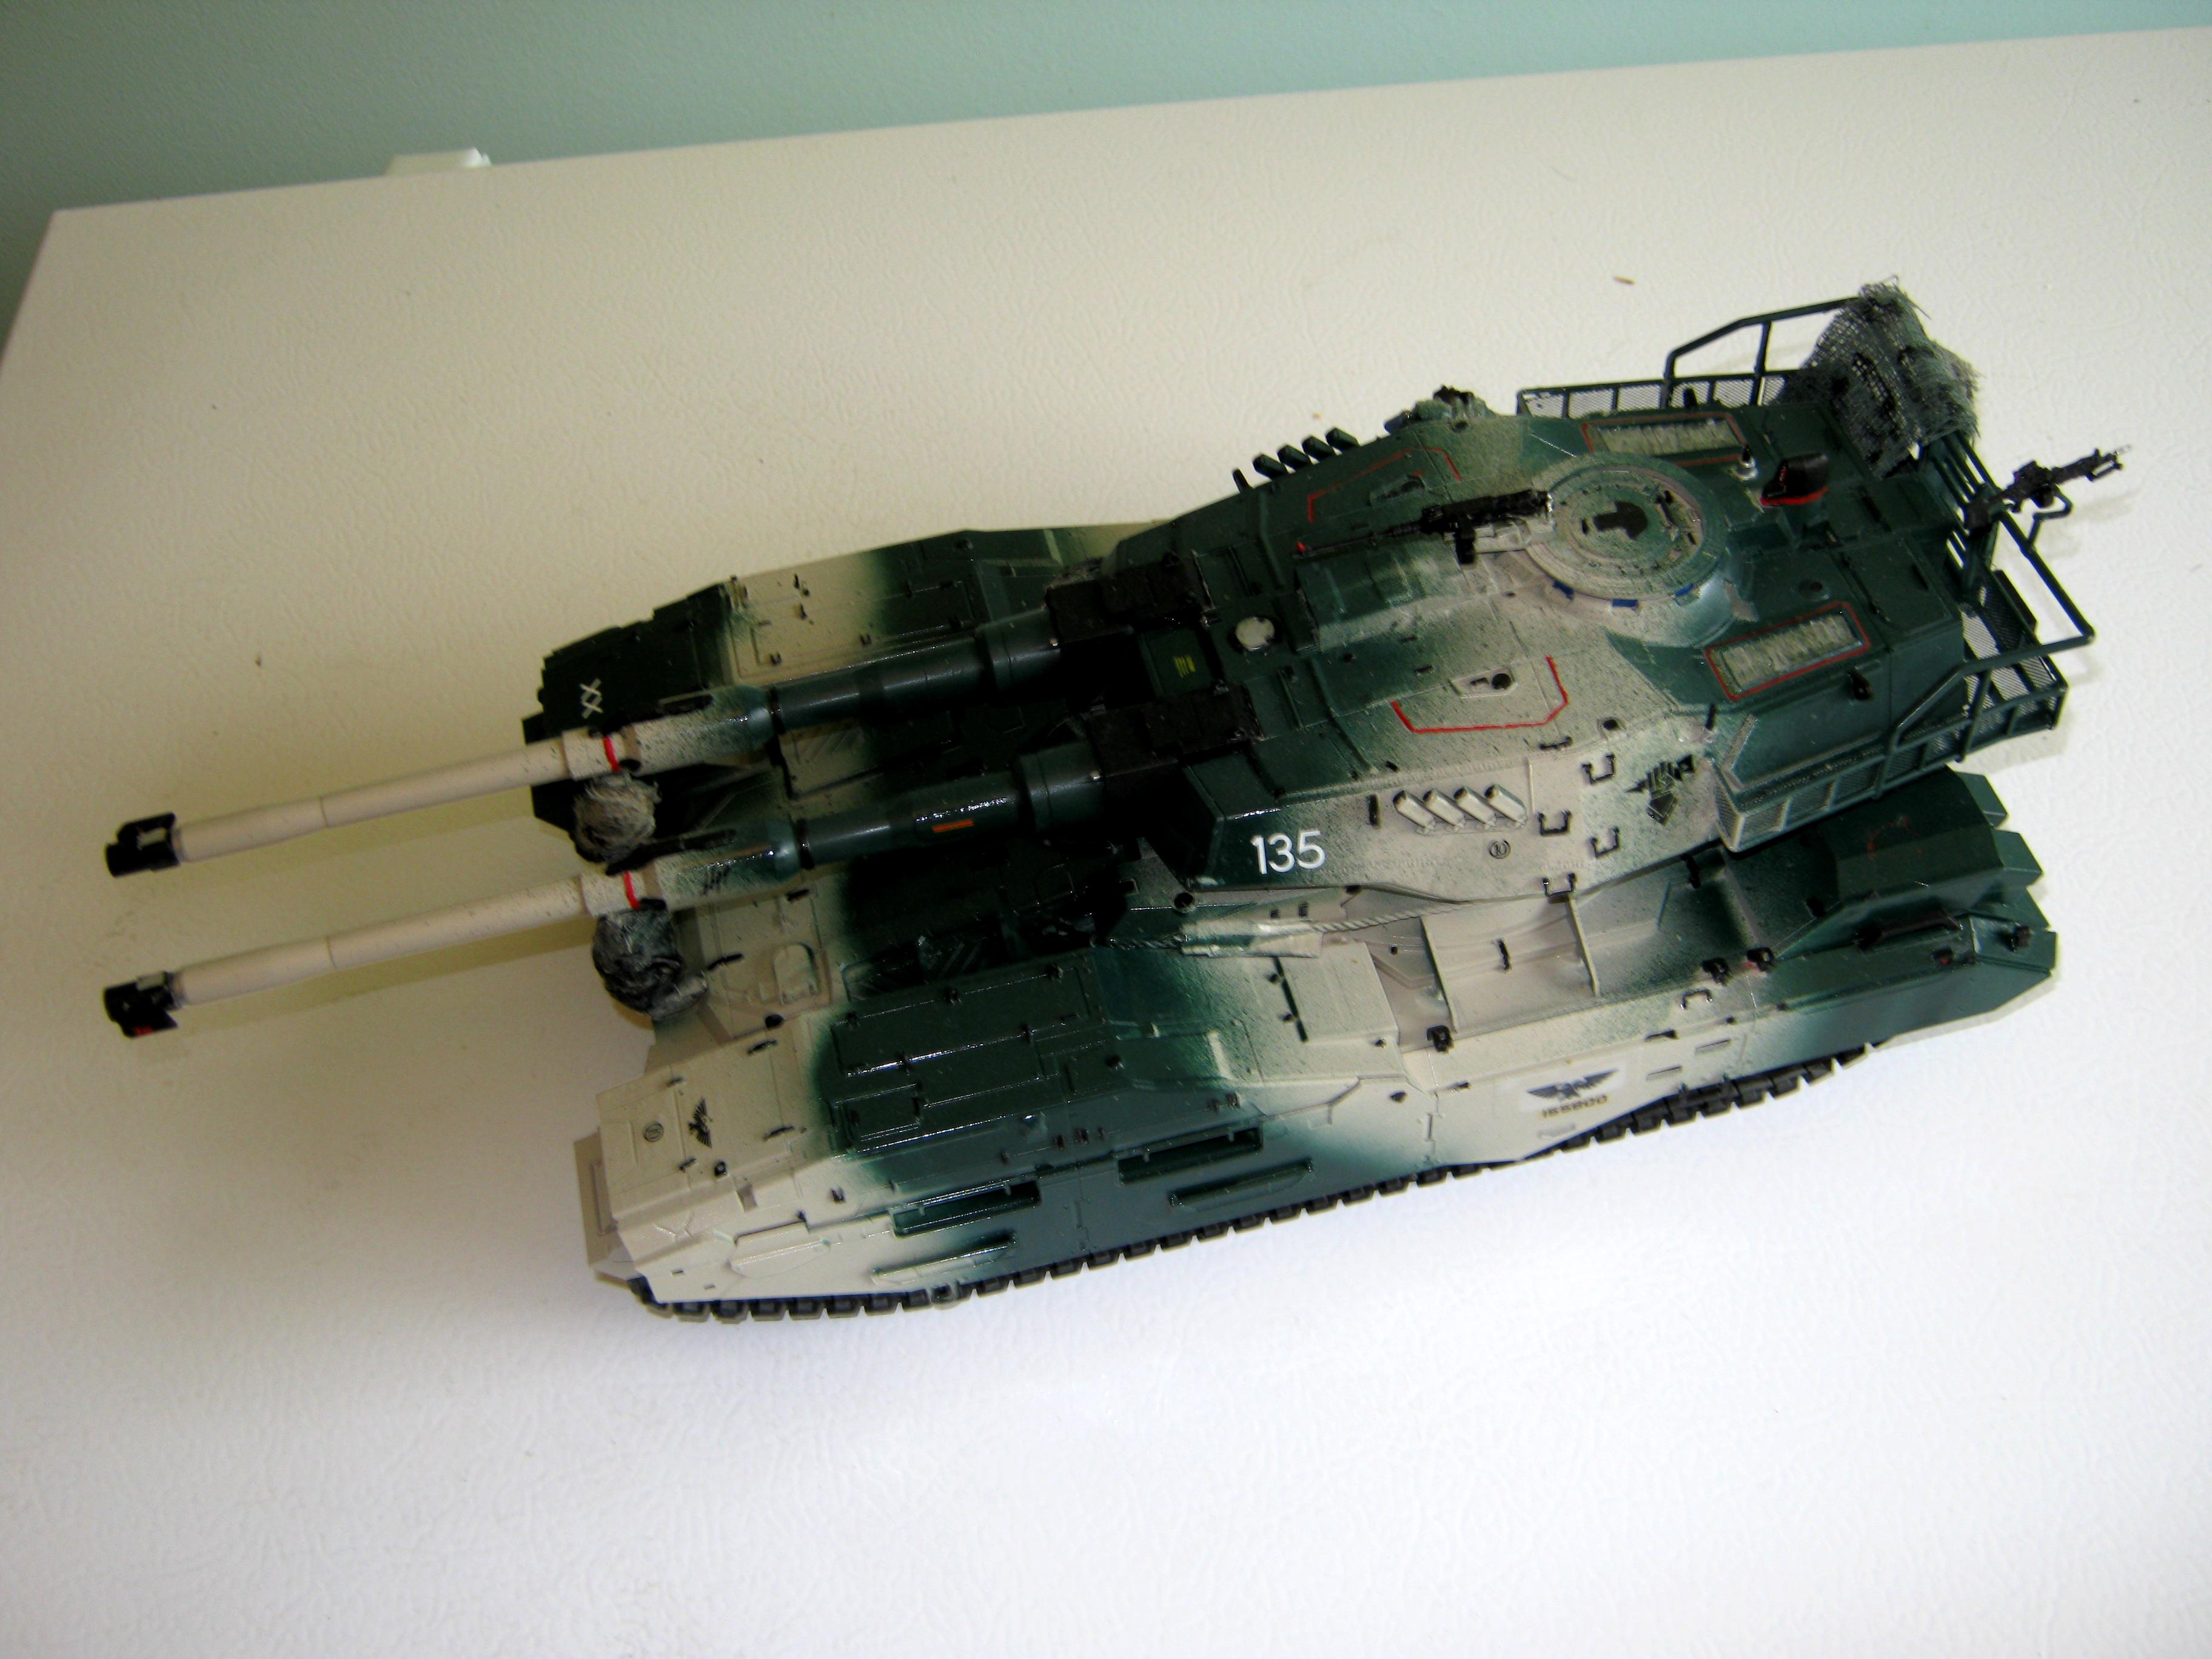 Anime, Conversion, Counts As, Gundam, Imperial, M61a5, Super-heavy, Tank, Tank Destroyer, Type 61